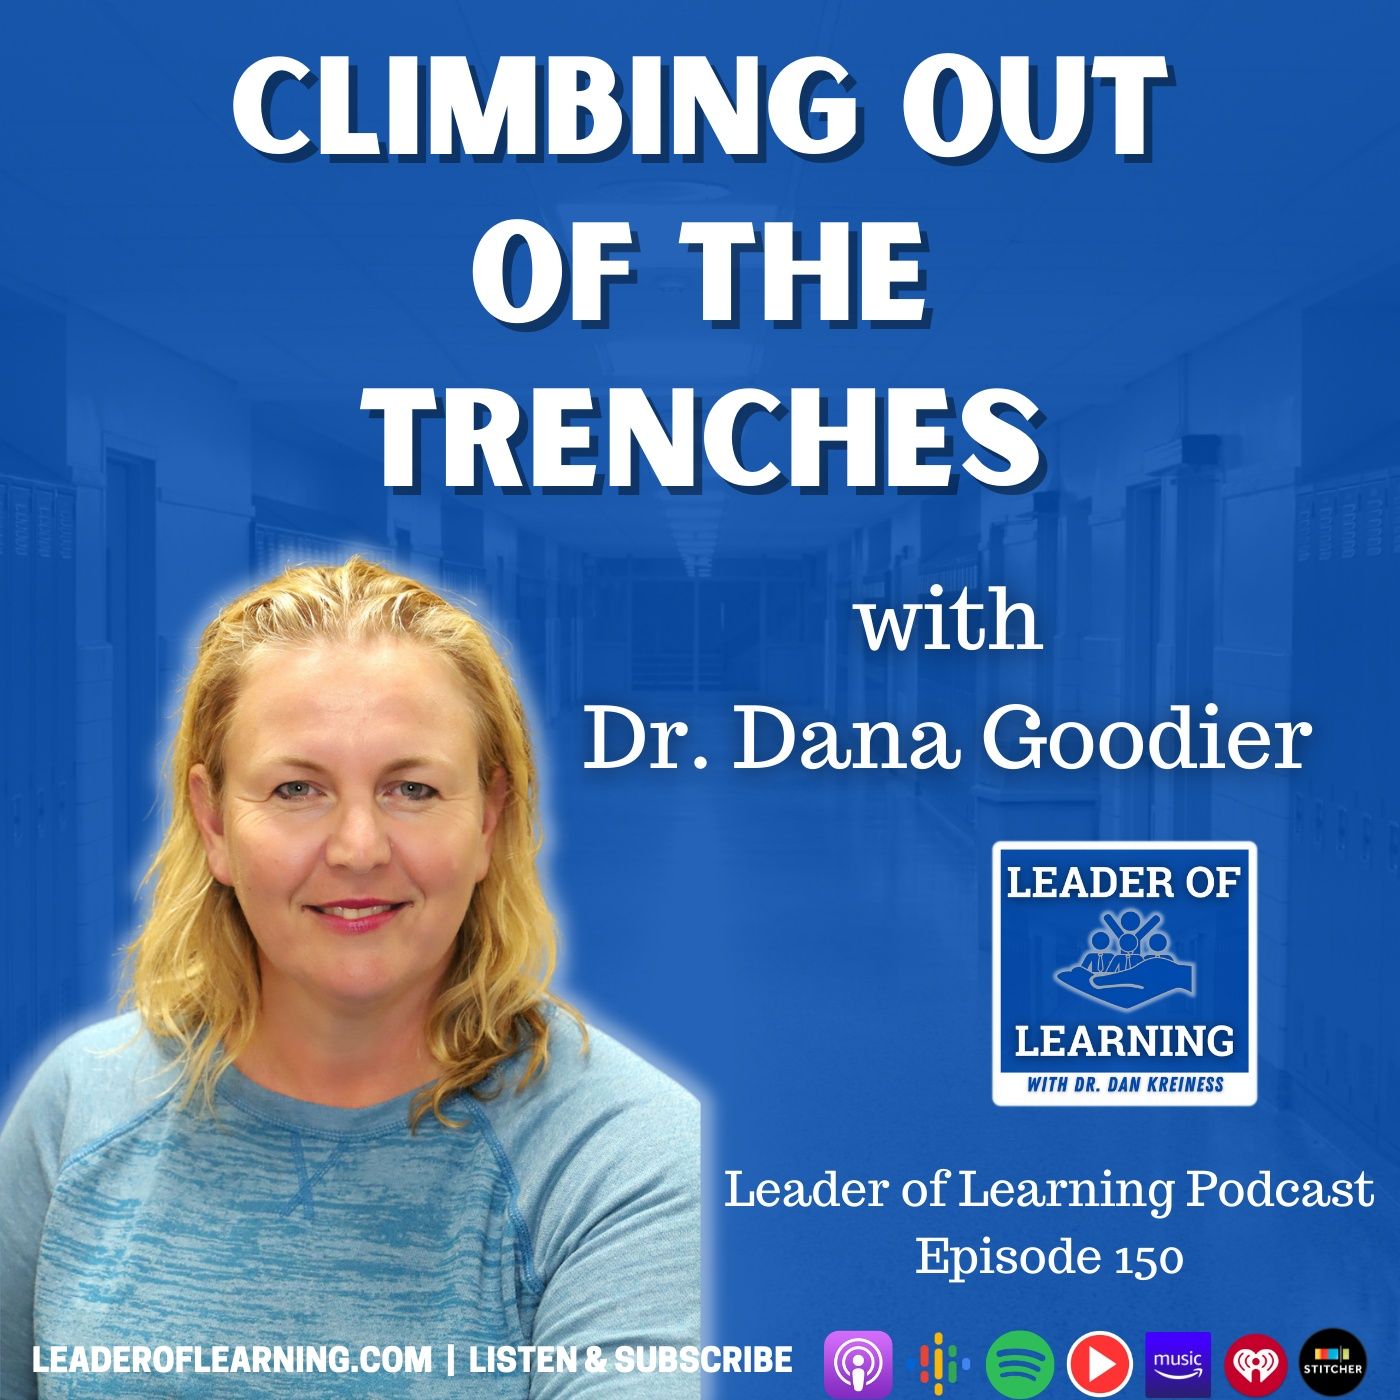 Climbing Out of the Trenches with Dr. Dana Goodier Image